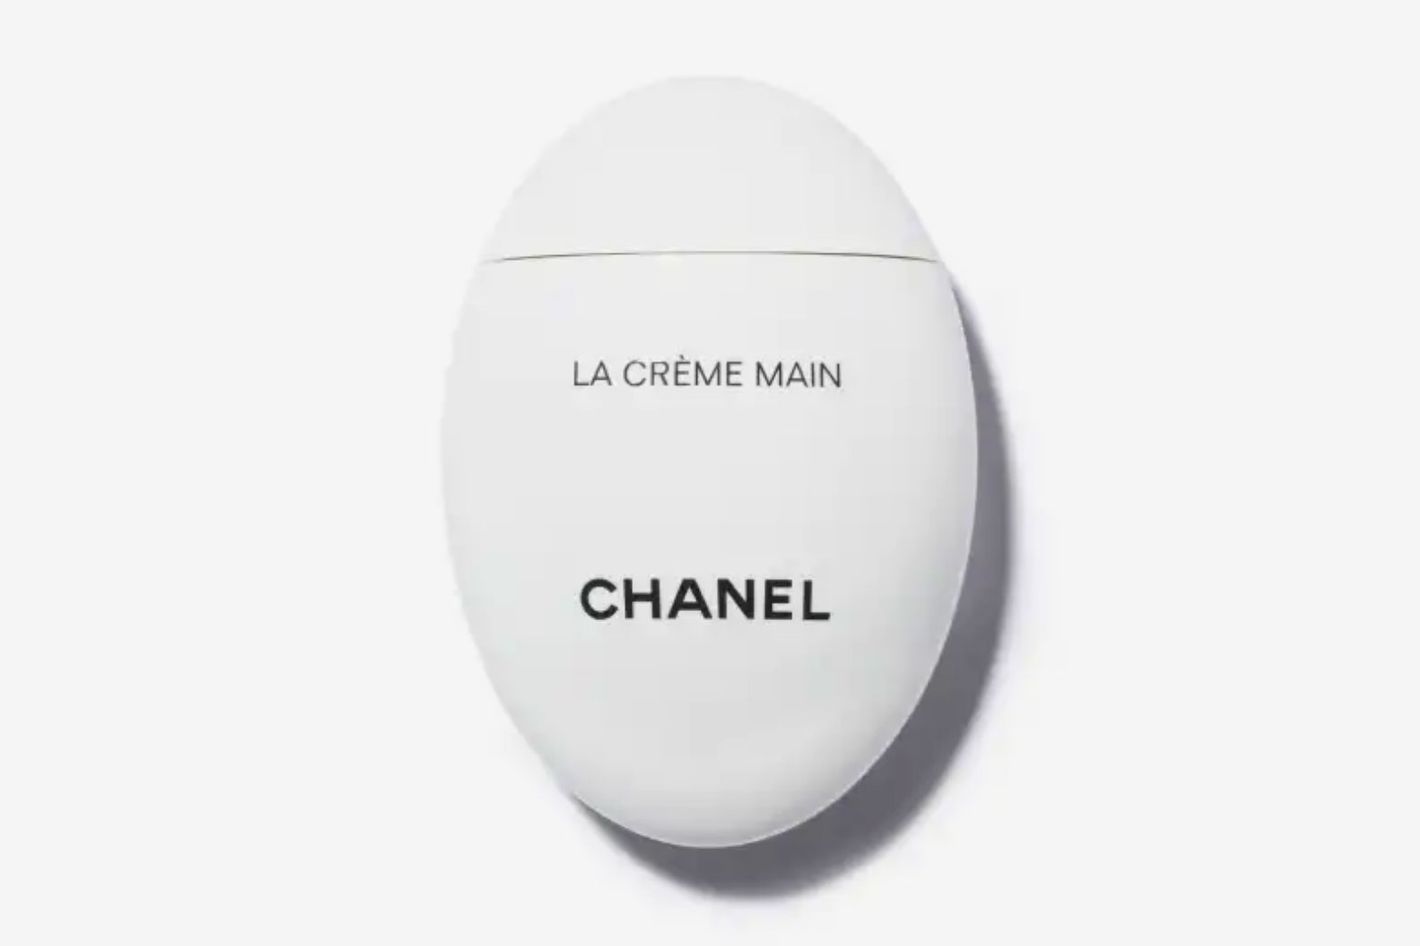 Chanel we go? Tatler's beauty and lifestyle editor heads to